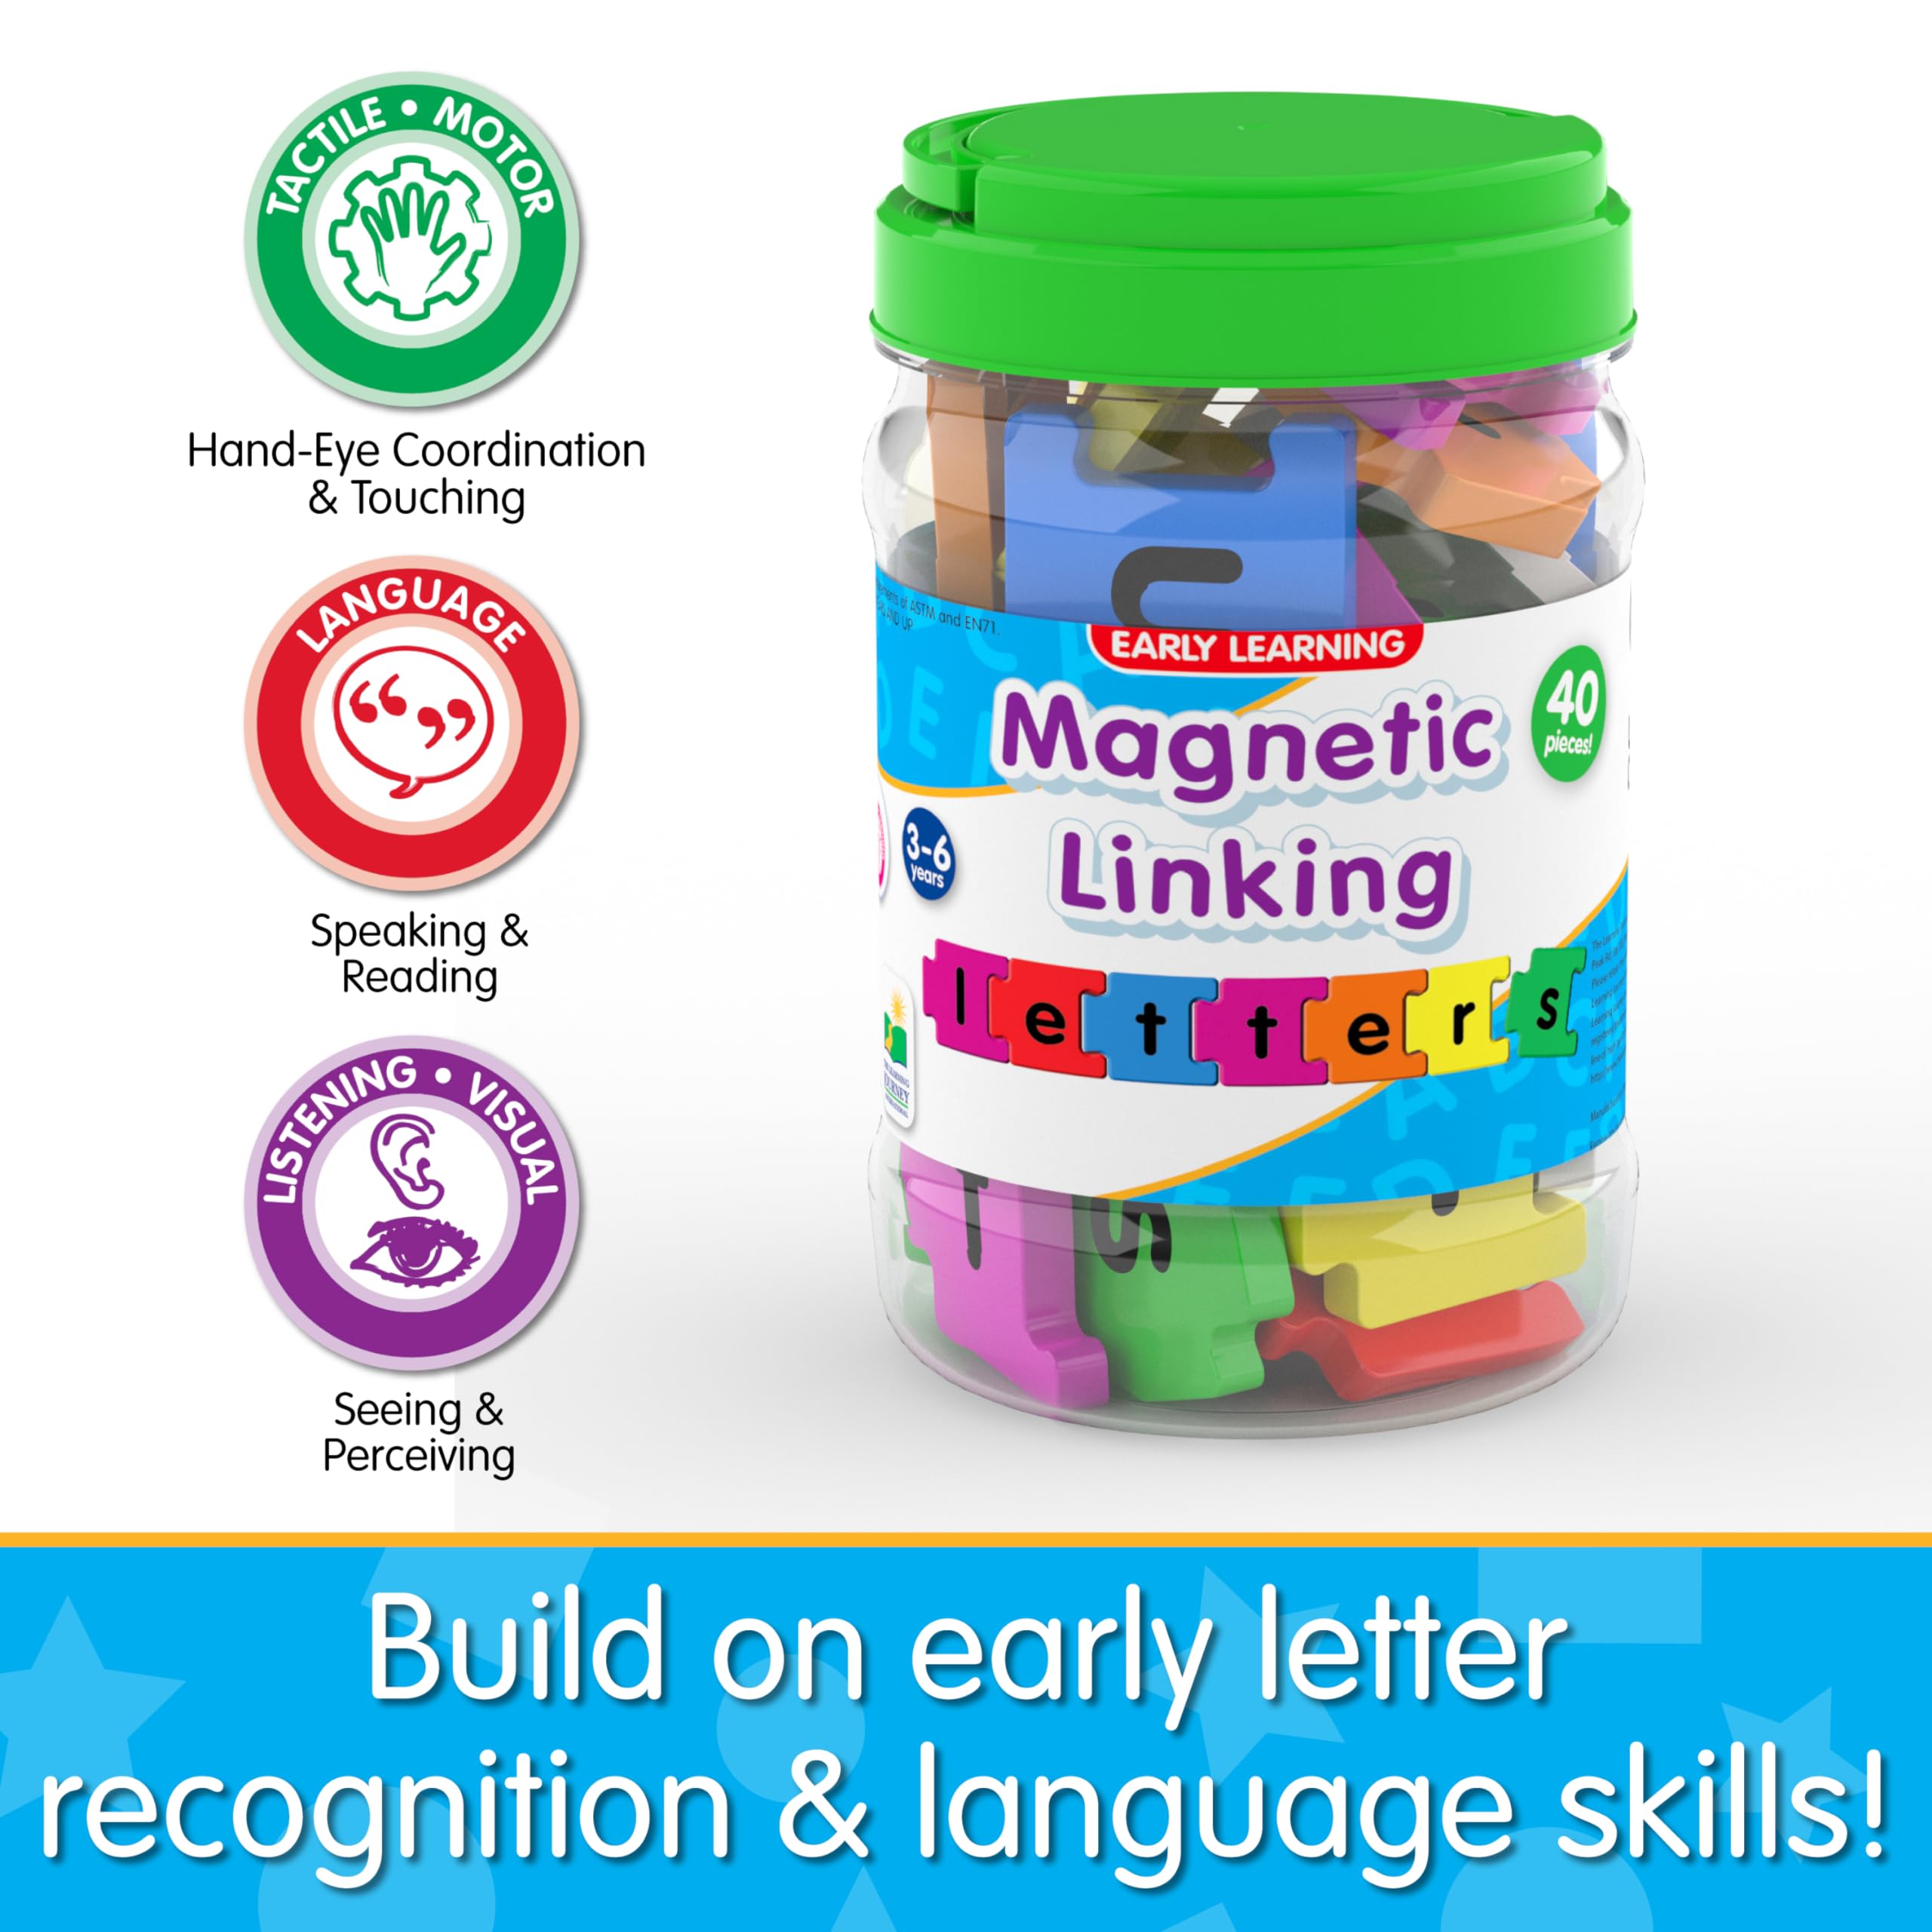 The Learning Journey Magnetic Linking Letters | Set of 40 Colorful ABC Magnets | Lowercase Letters | Fridge Magnets for Toddlers 3+ | Alphabet Letters for Kids Spelling and Learning